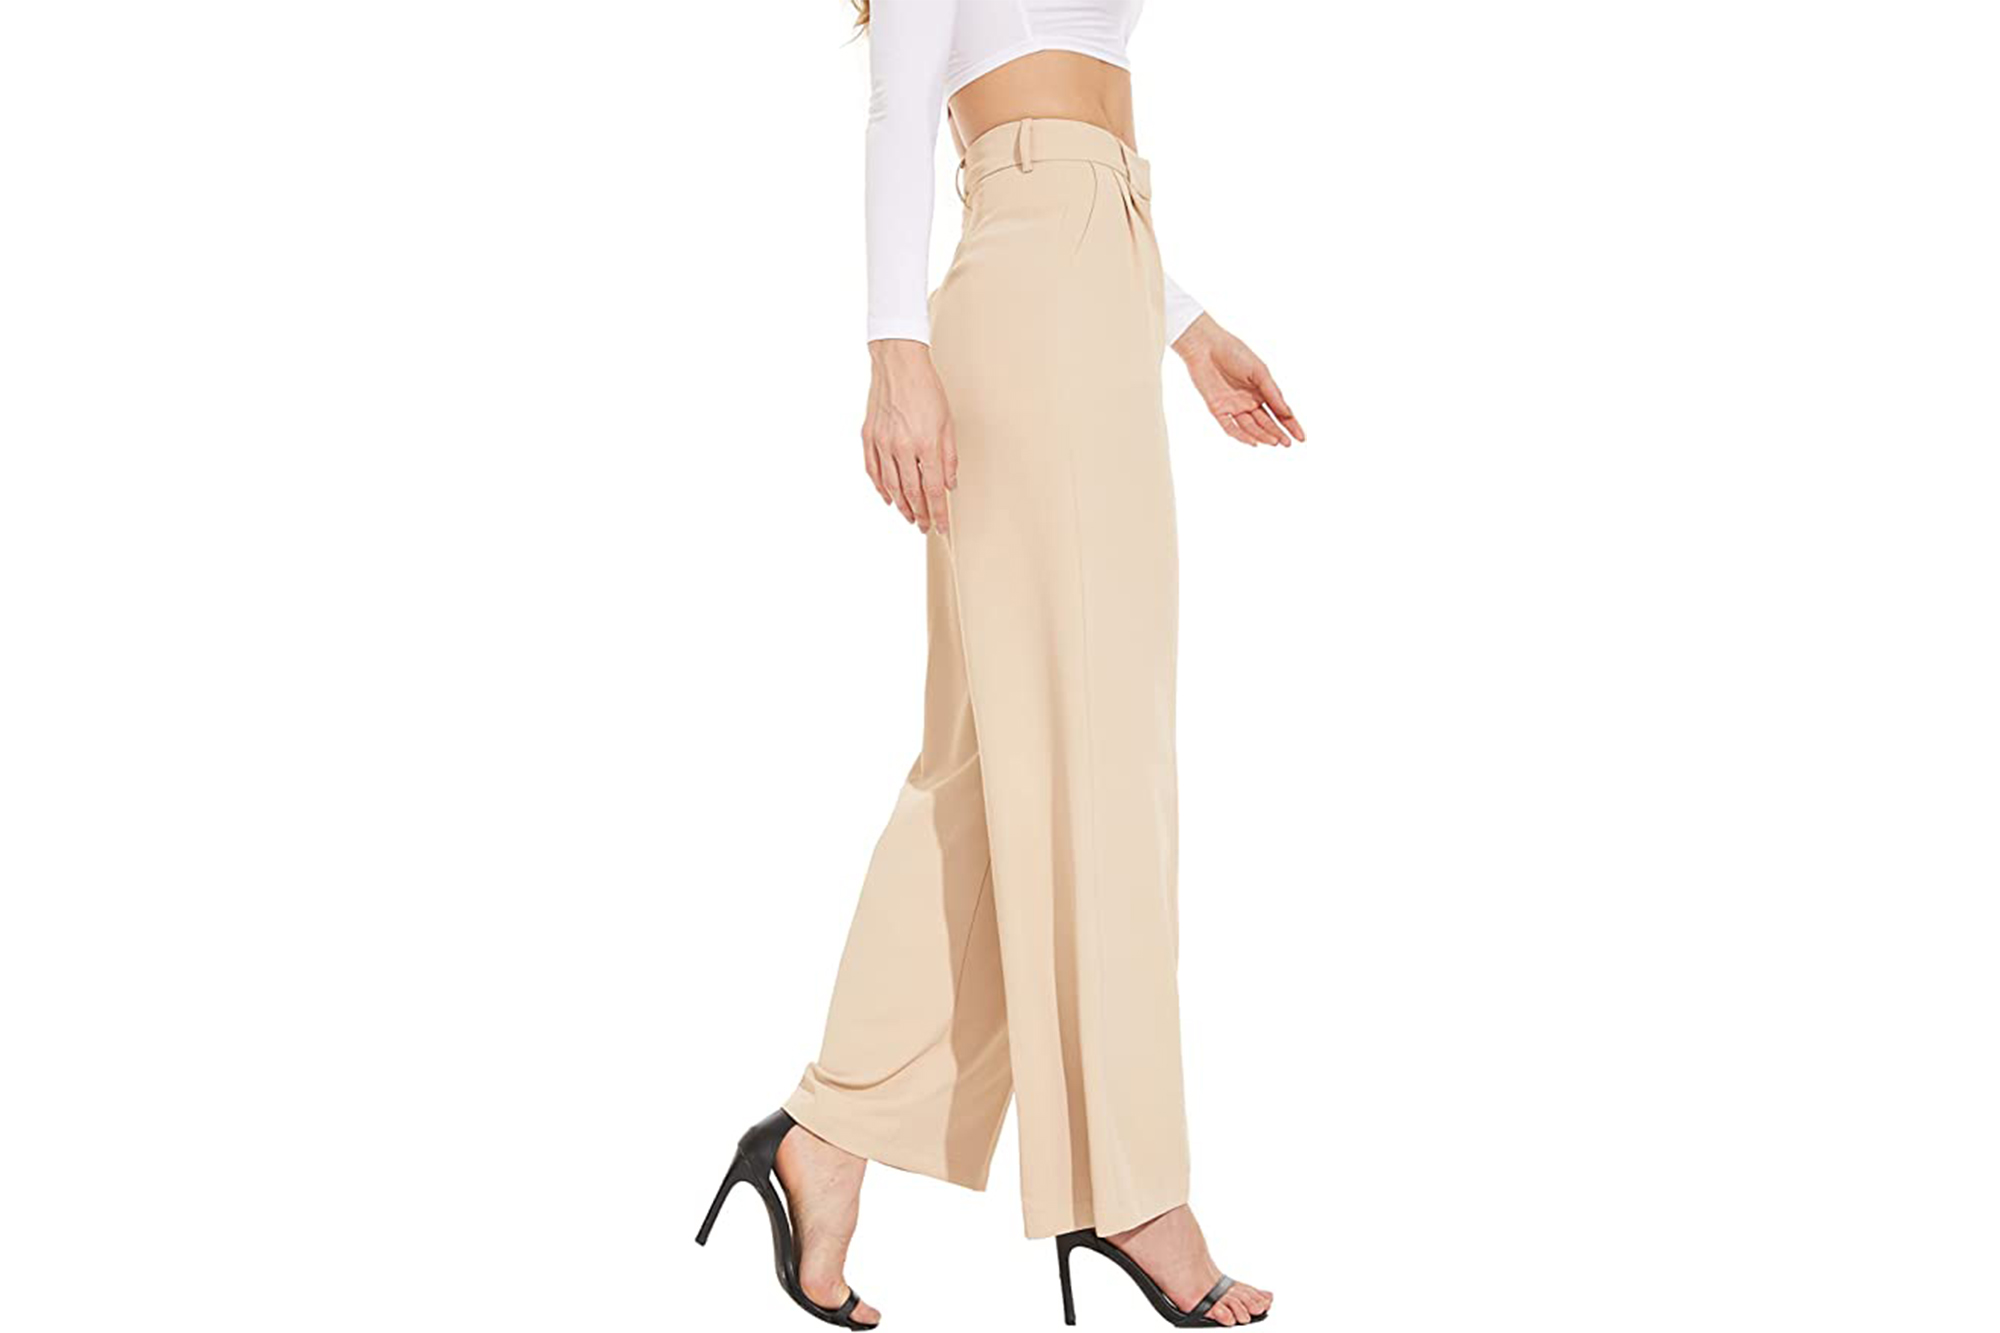 FUNYYZO Chic Wide-Leg Pants Are Great for Both Work and Play